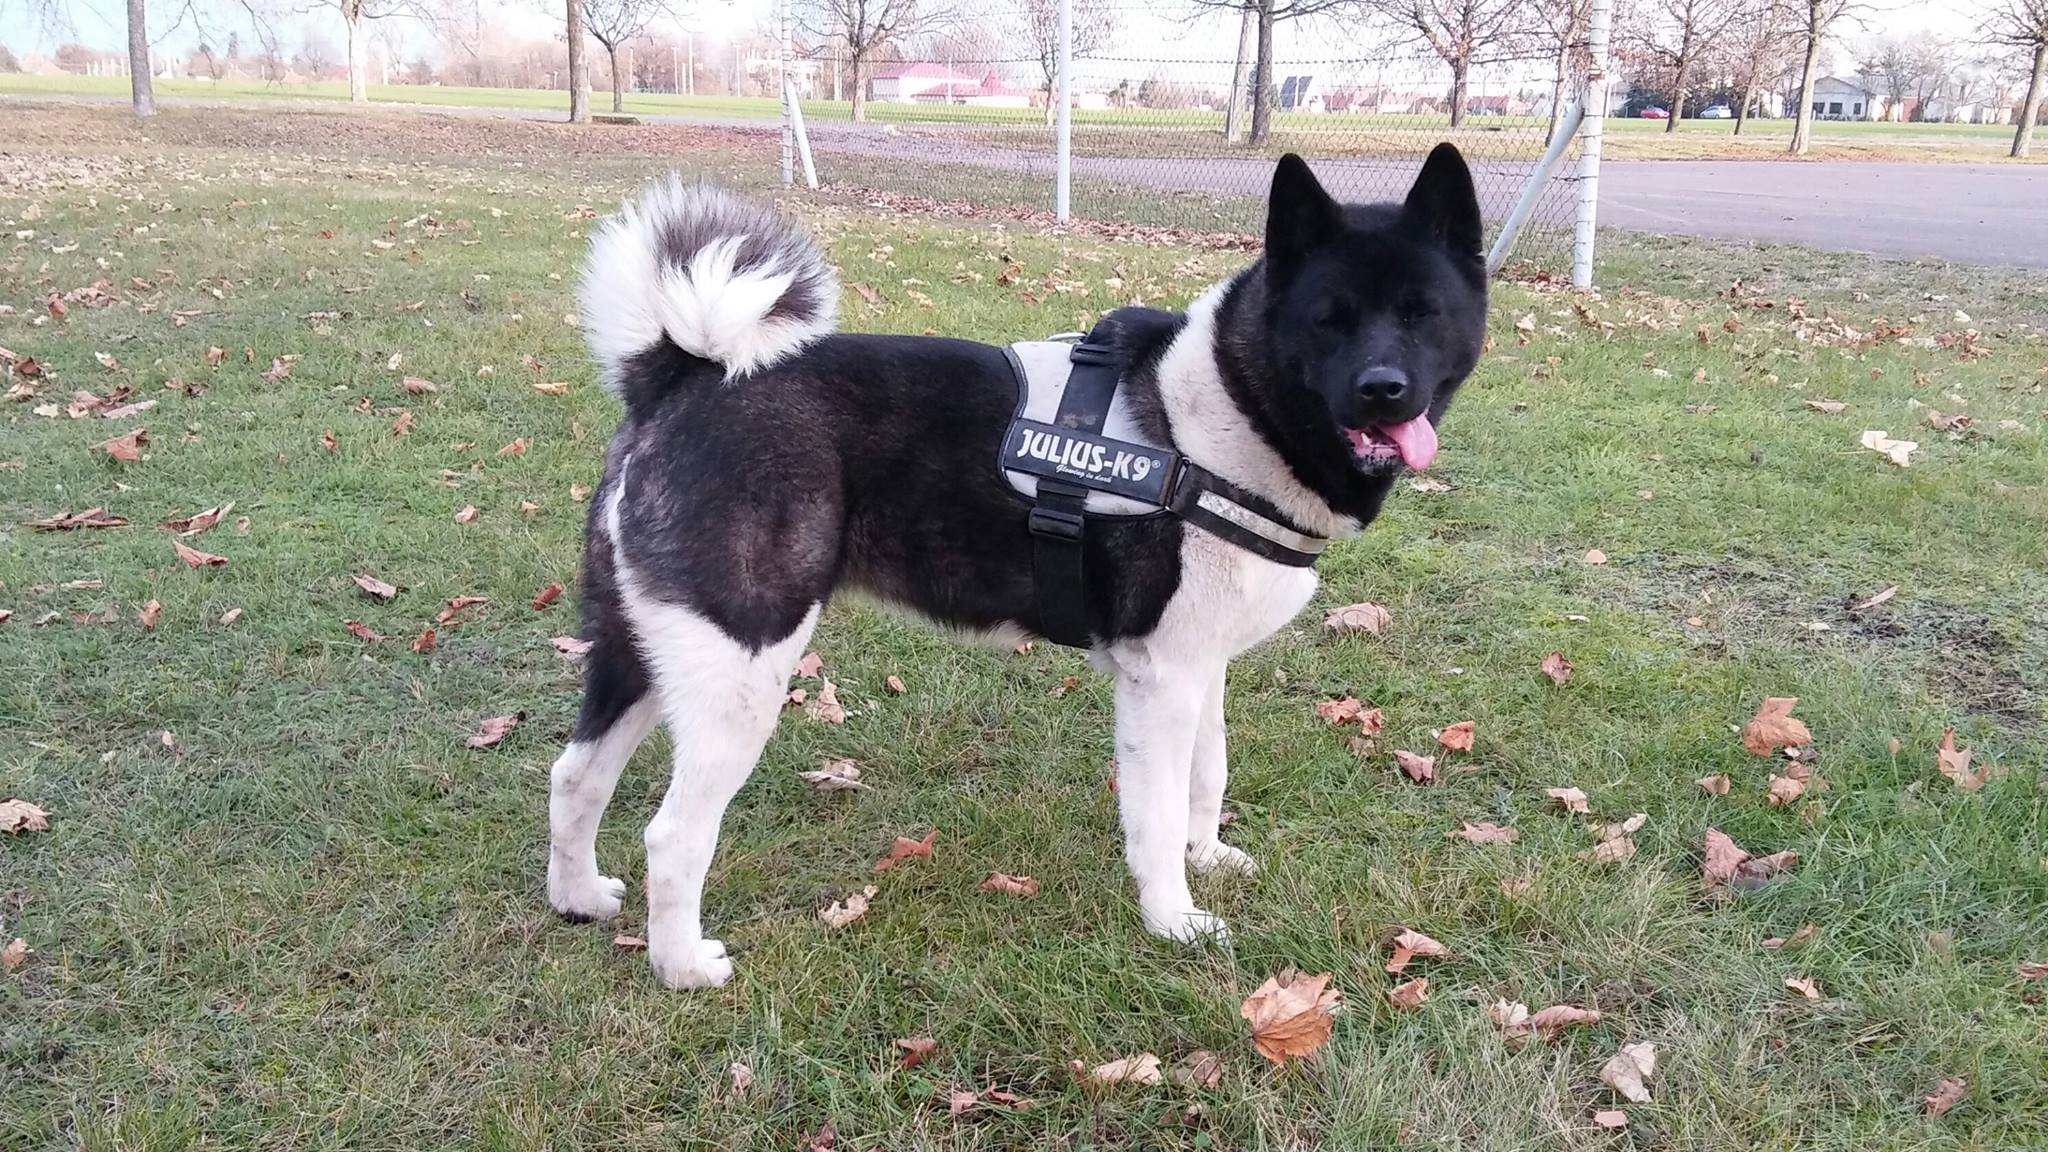 An Akita Inu standing at the park with its tongue out